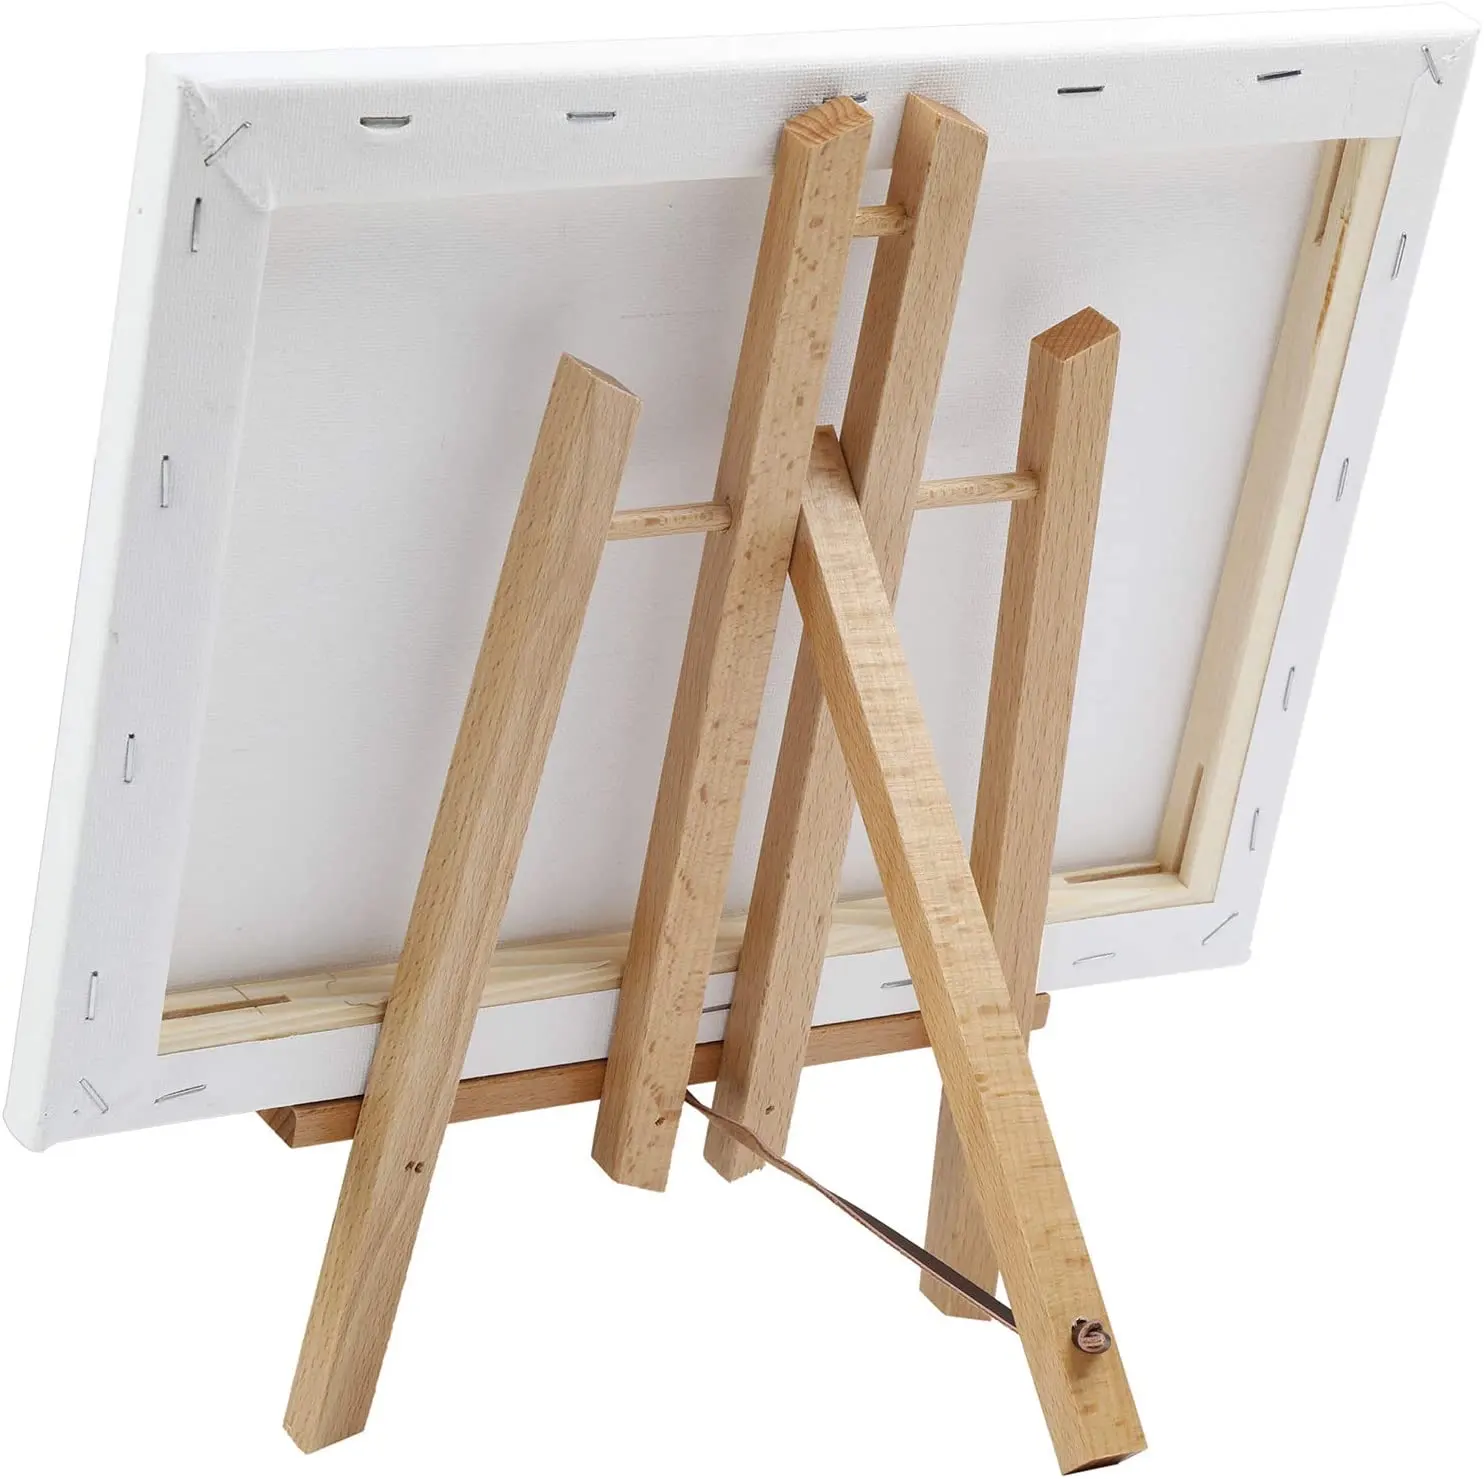 MEEDEN 11.8 Tall Beechwood Tabletop Easel 9 x 12 ed Canvas with Canvas Sets for Painting Craft Drawing Decoration Sets